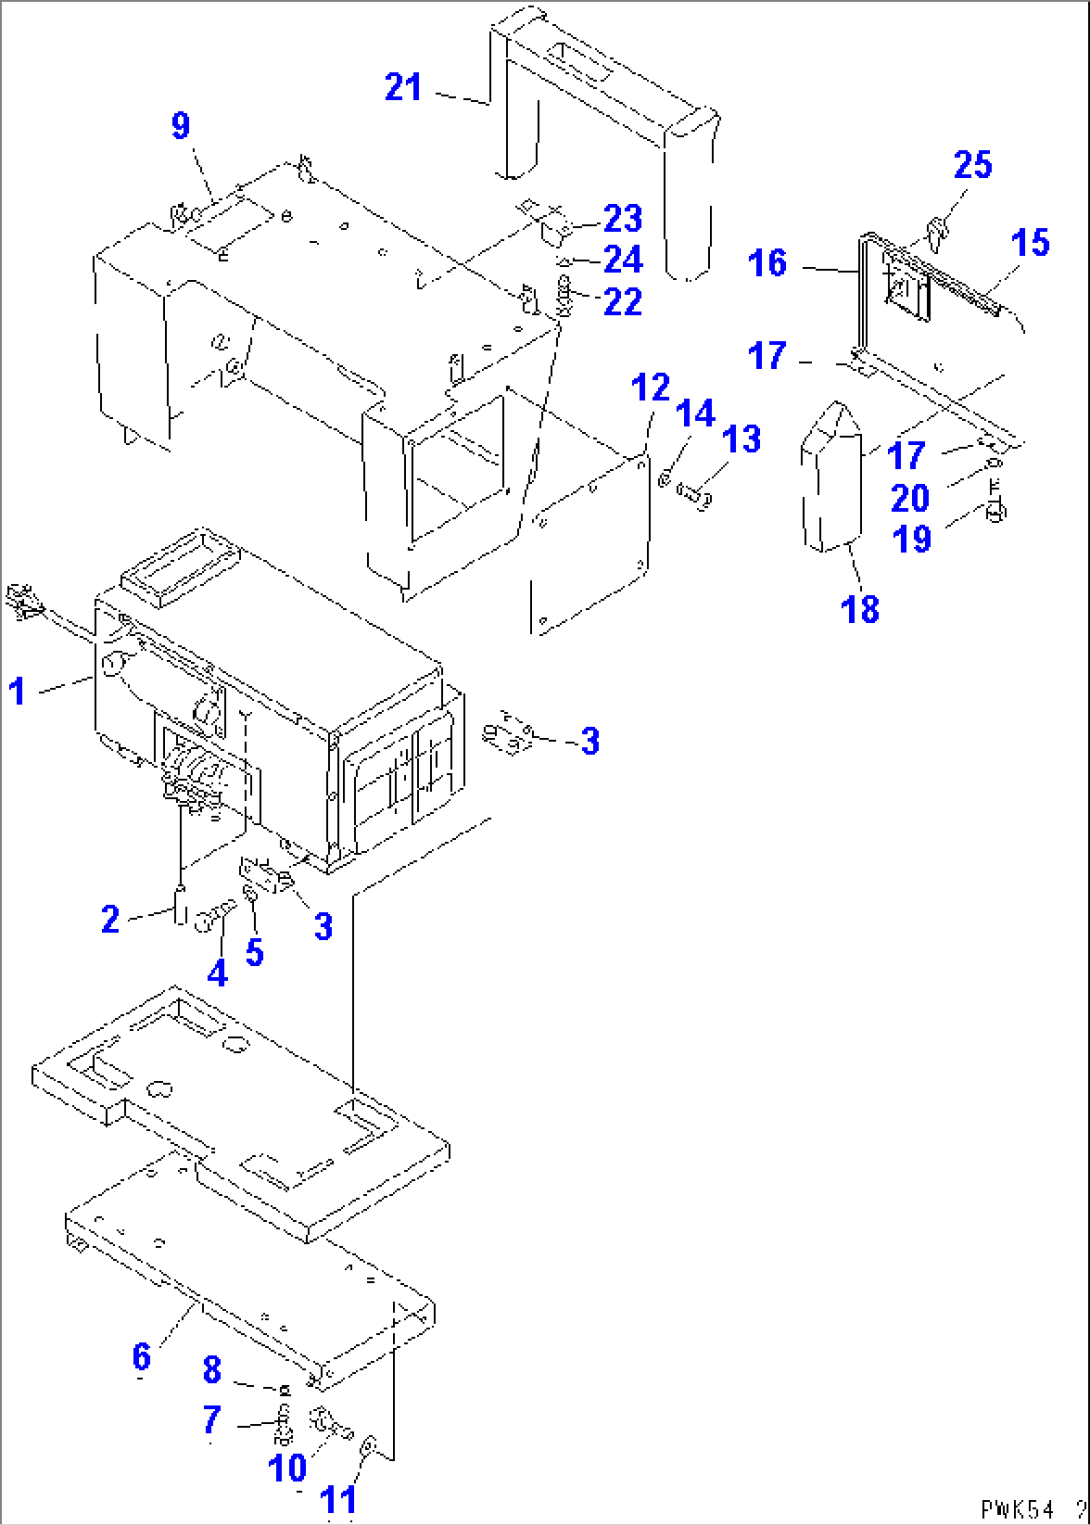 AIR CONDITIONER (AIR CONDITIONER UNIT AND MOUNTING)